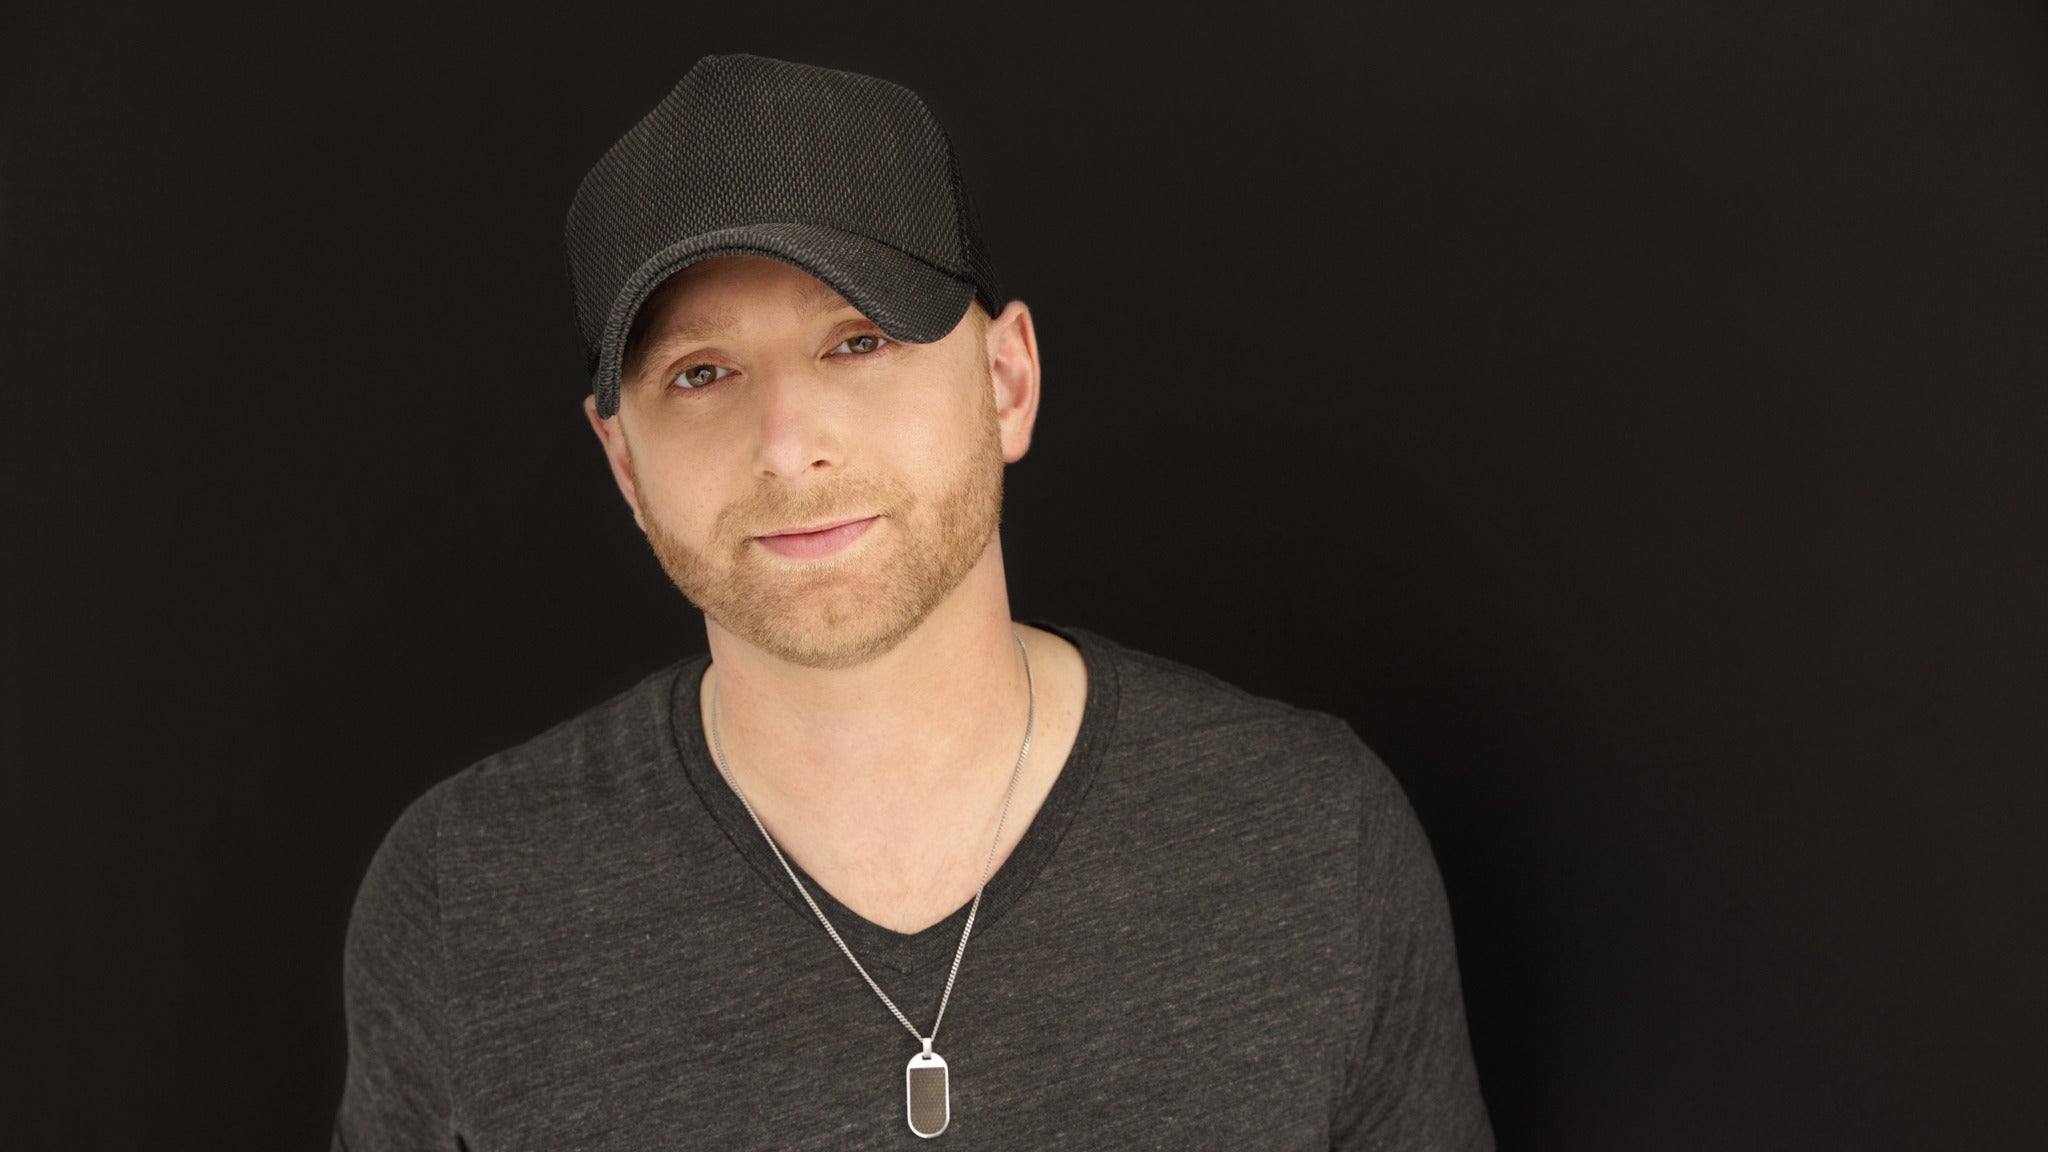 Tim Hicks Wreck This Town World Tour in Kingston promo photo for Front Of The Line by American Express presale offer code